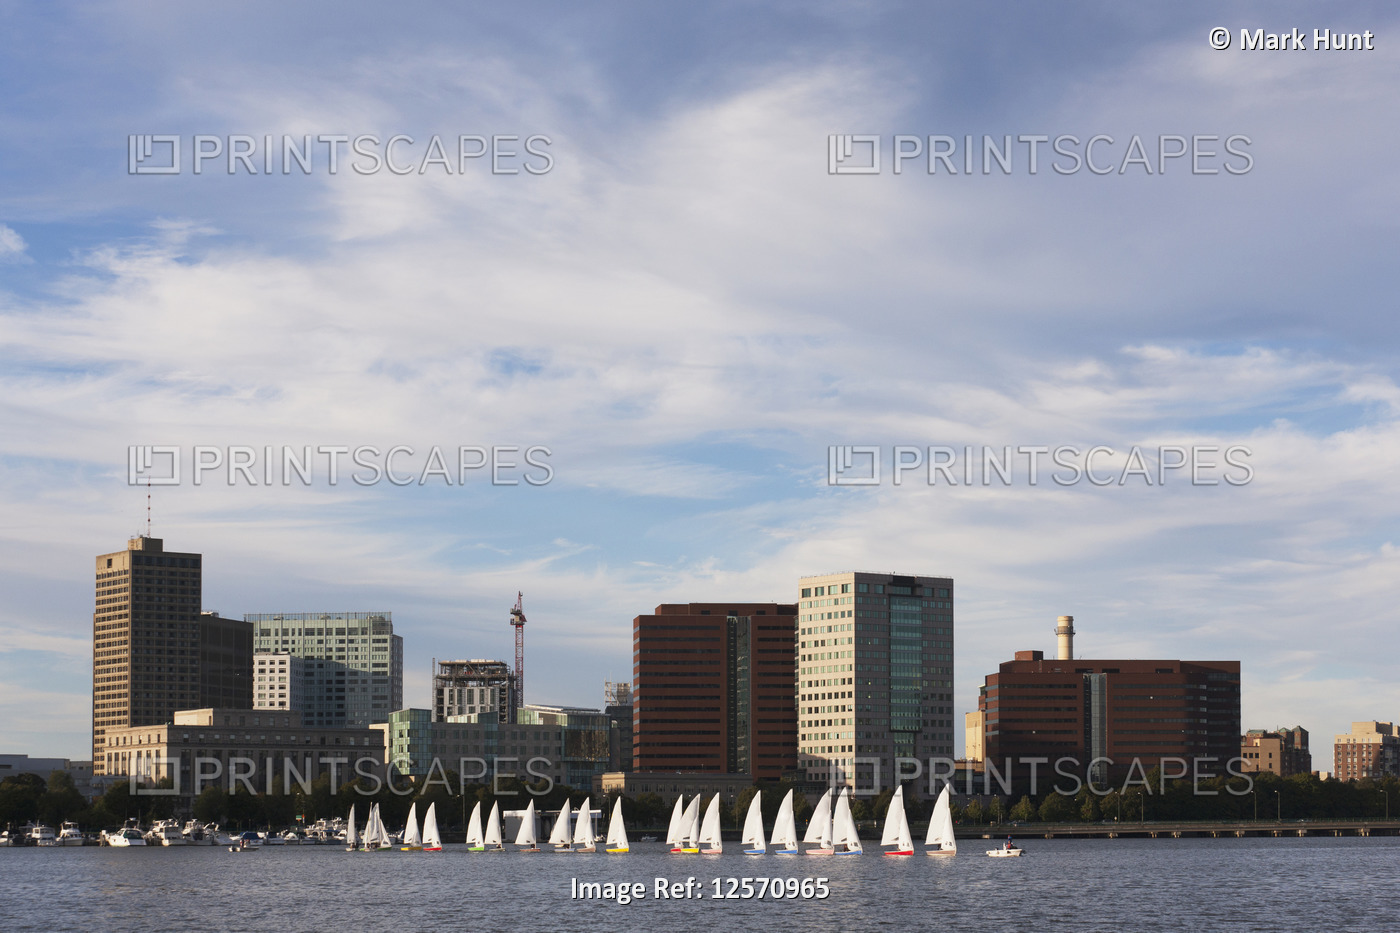 Sailboats in a river, Massachusetts Institute of Technology, Charles River, ...